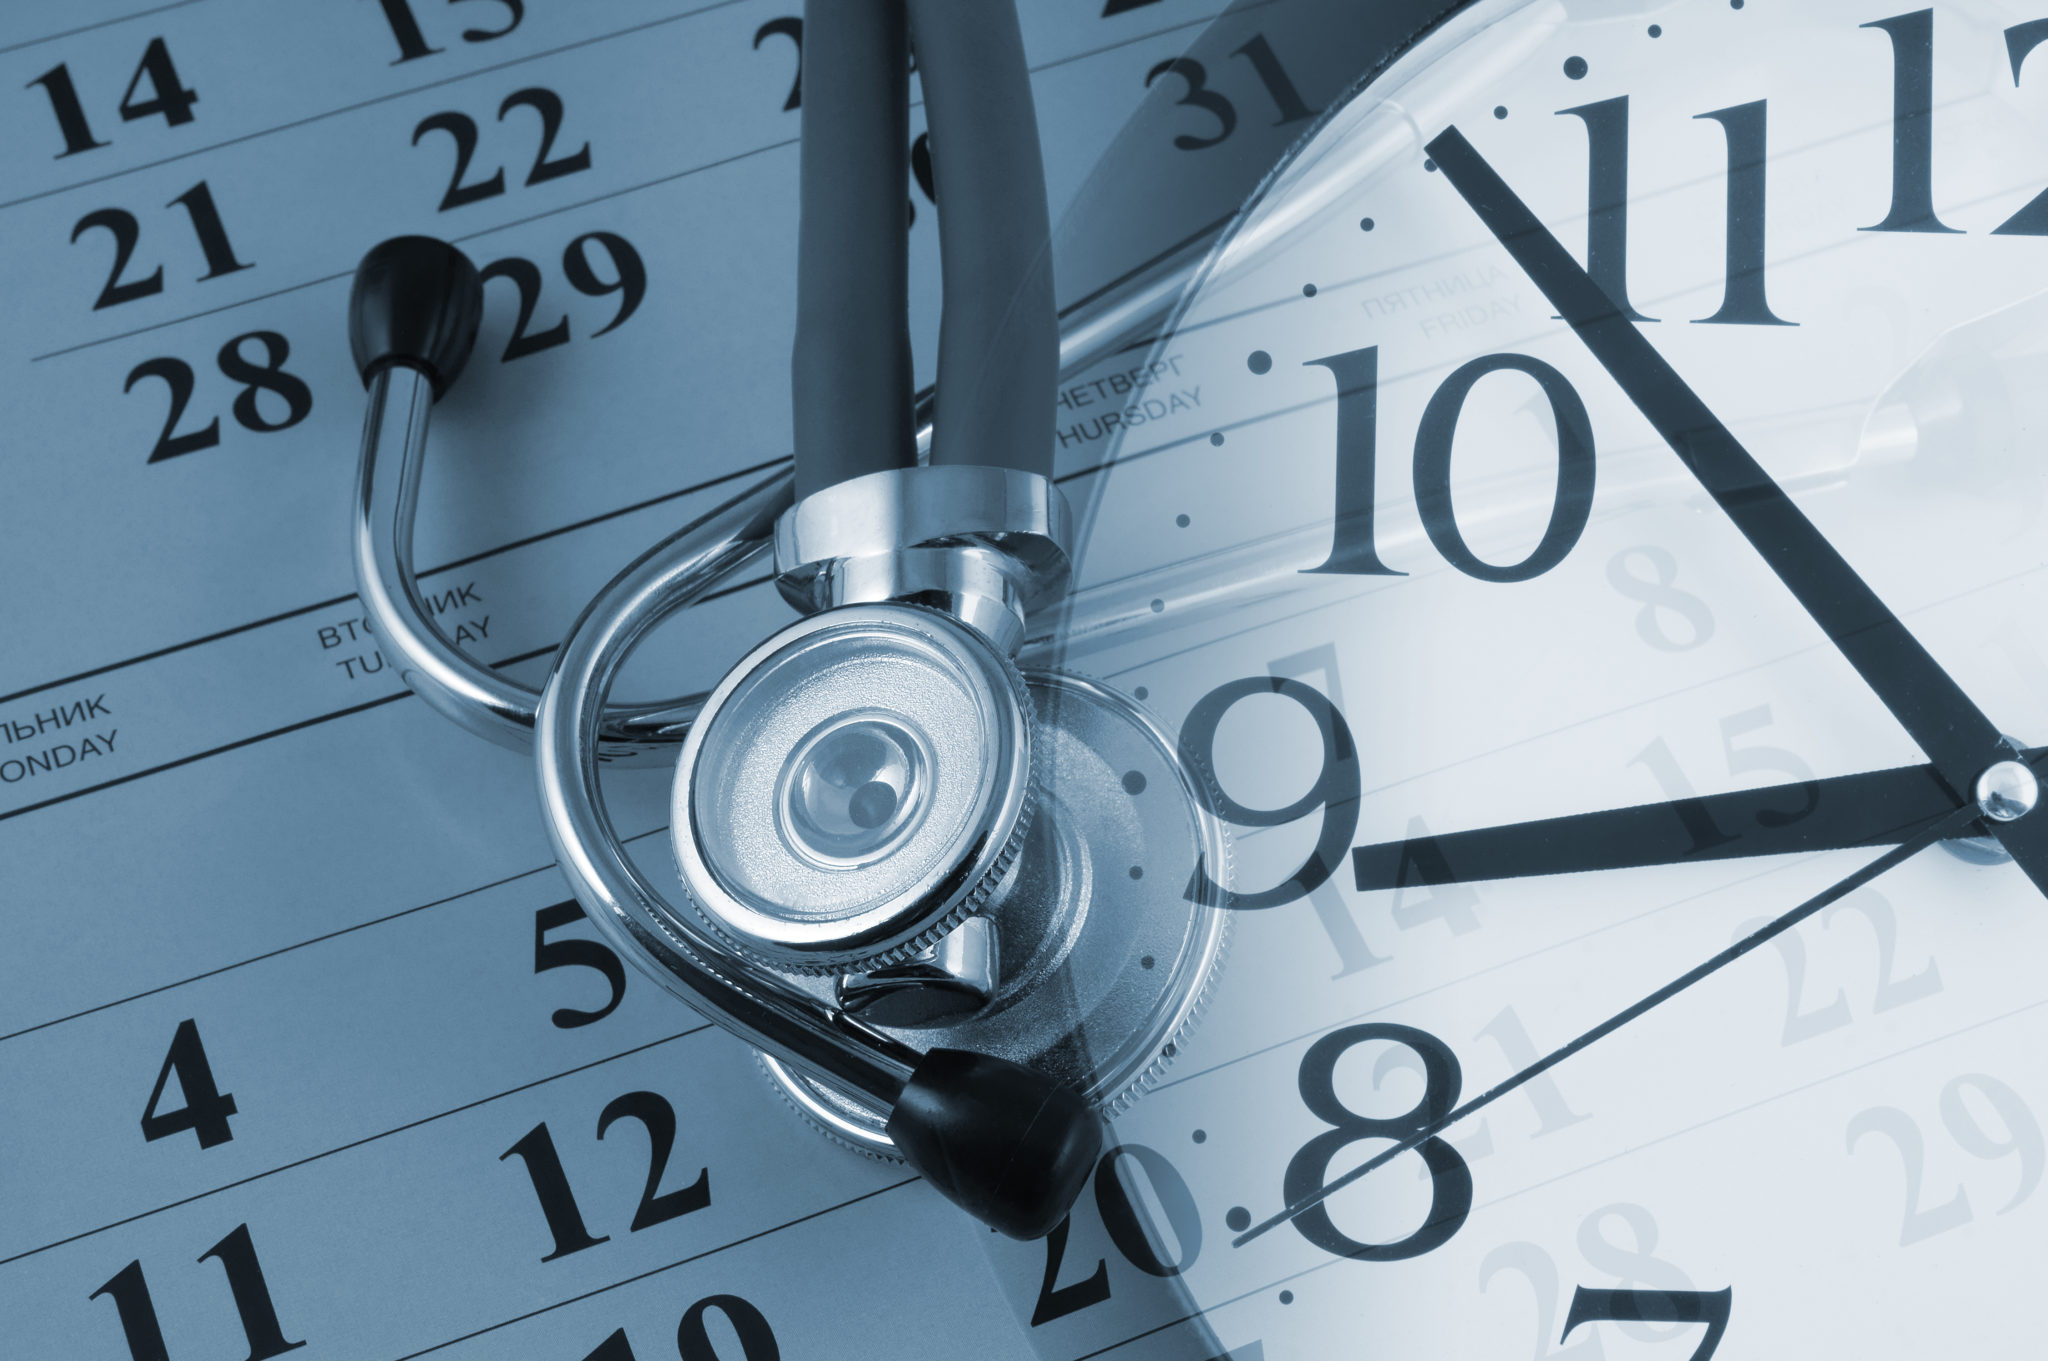 Centralized Scheduling: Benefits and Risks